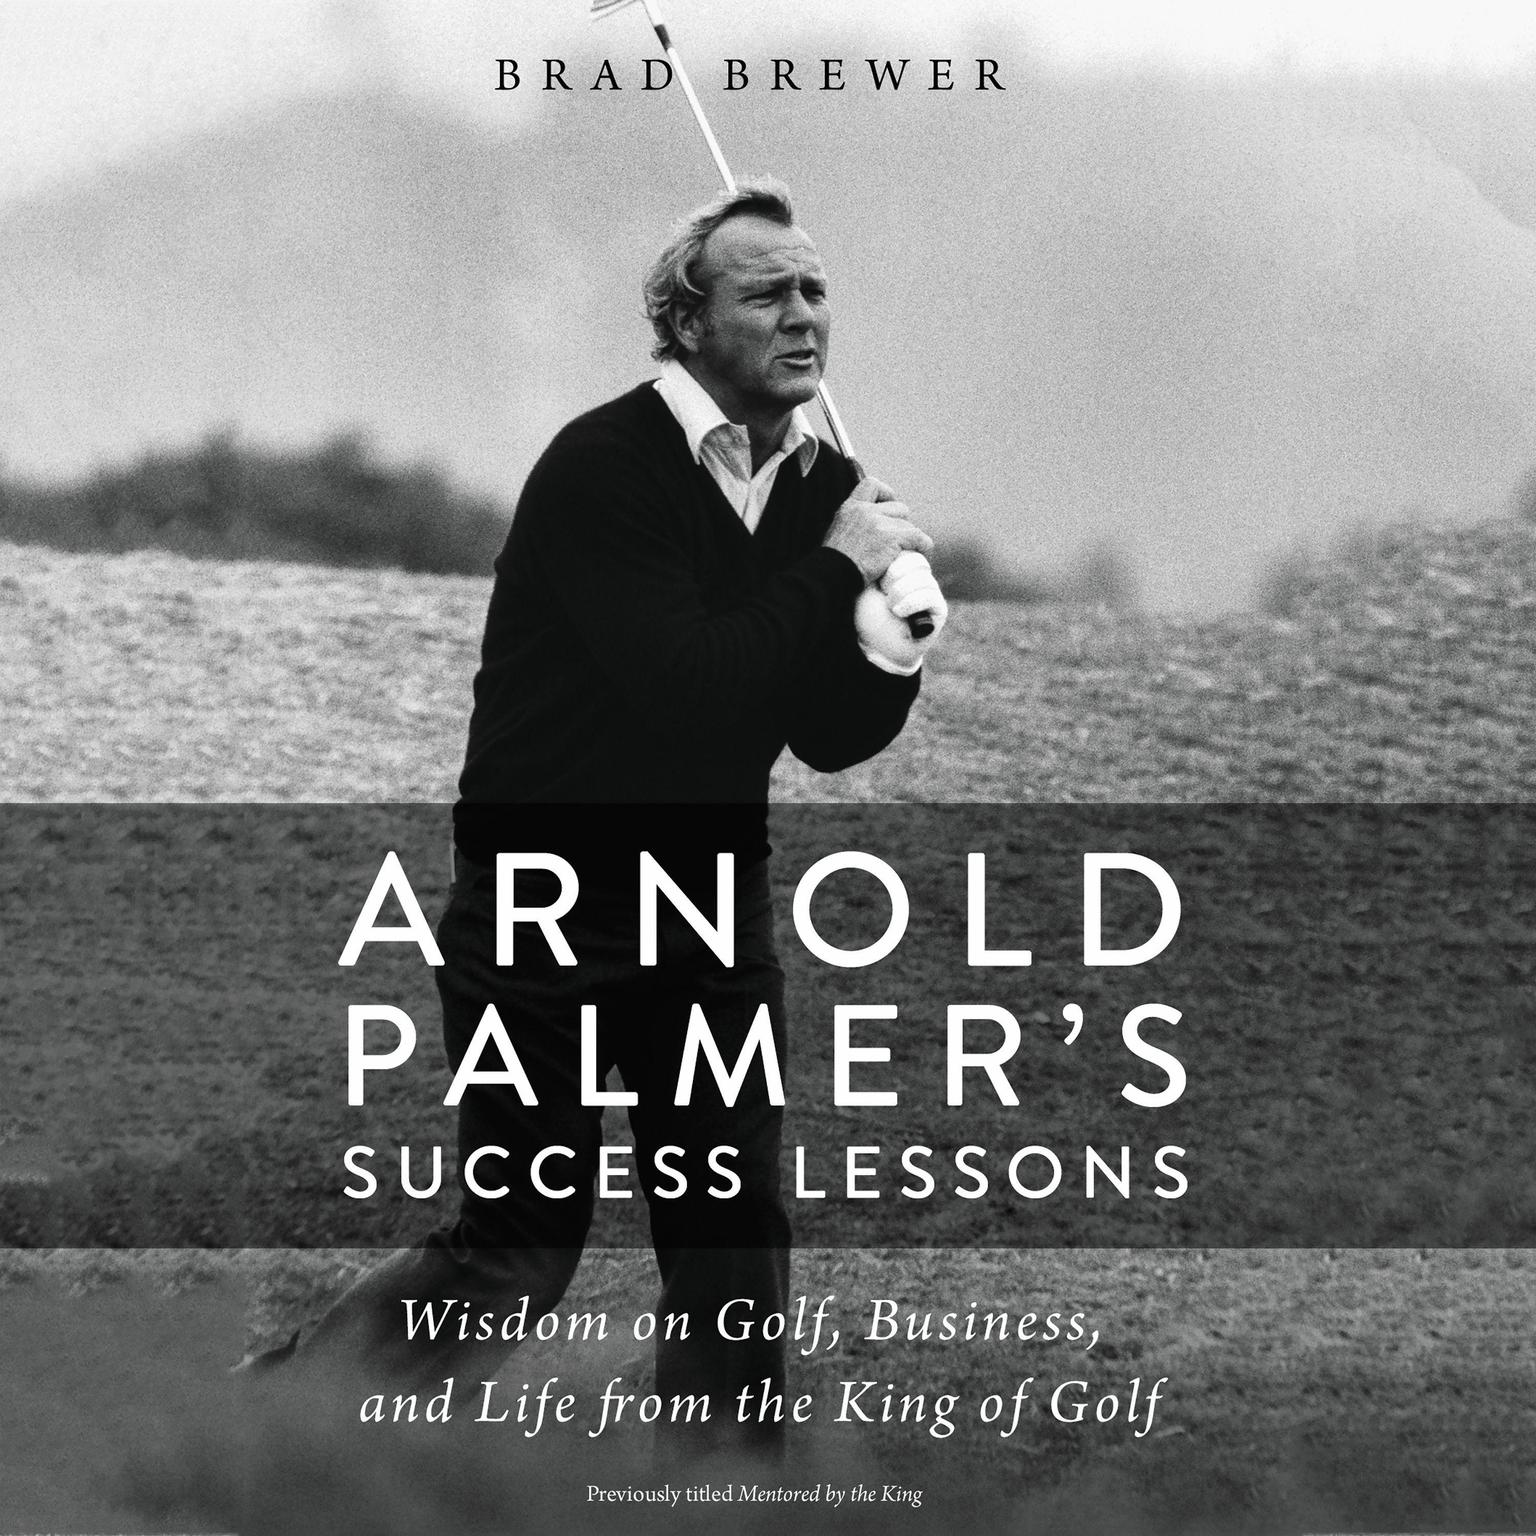 Arnold Palmers Success Lessons: Wisdom on Golf, Business, and Life from the King of Golf Audiobook, by Brad Brewer